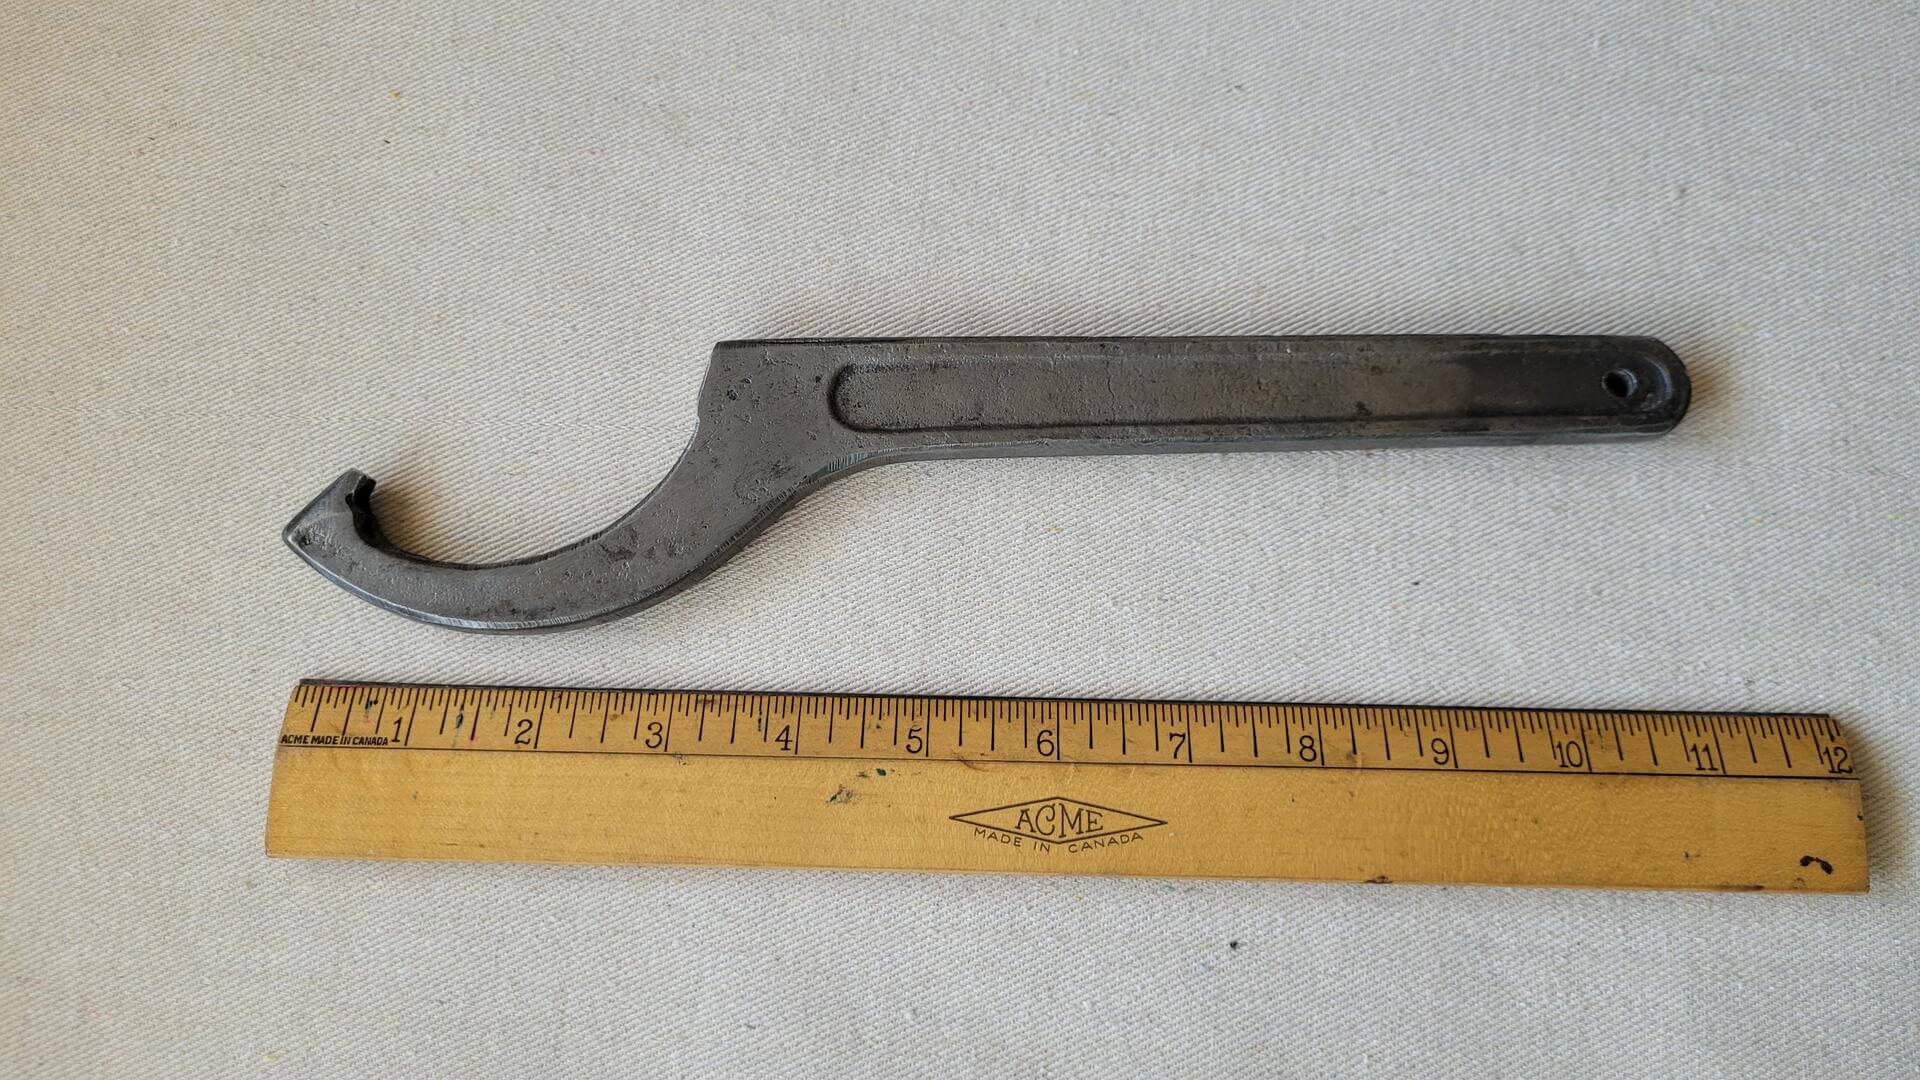 LD C hook fixed spanner wrench 90-95mm capacity used to adjust nuts on shocks. Vintage made in USA collectible automotive and motorcycle mechanic hand tools